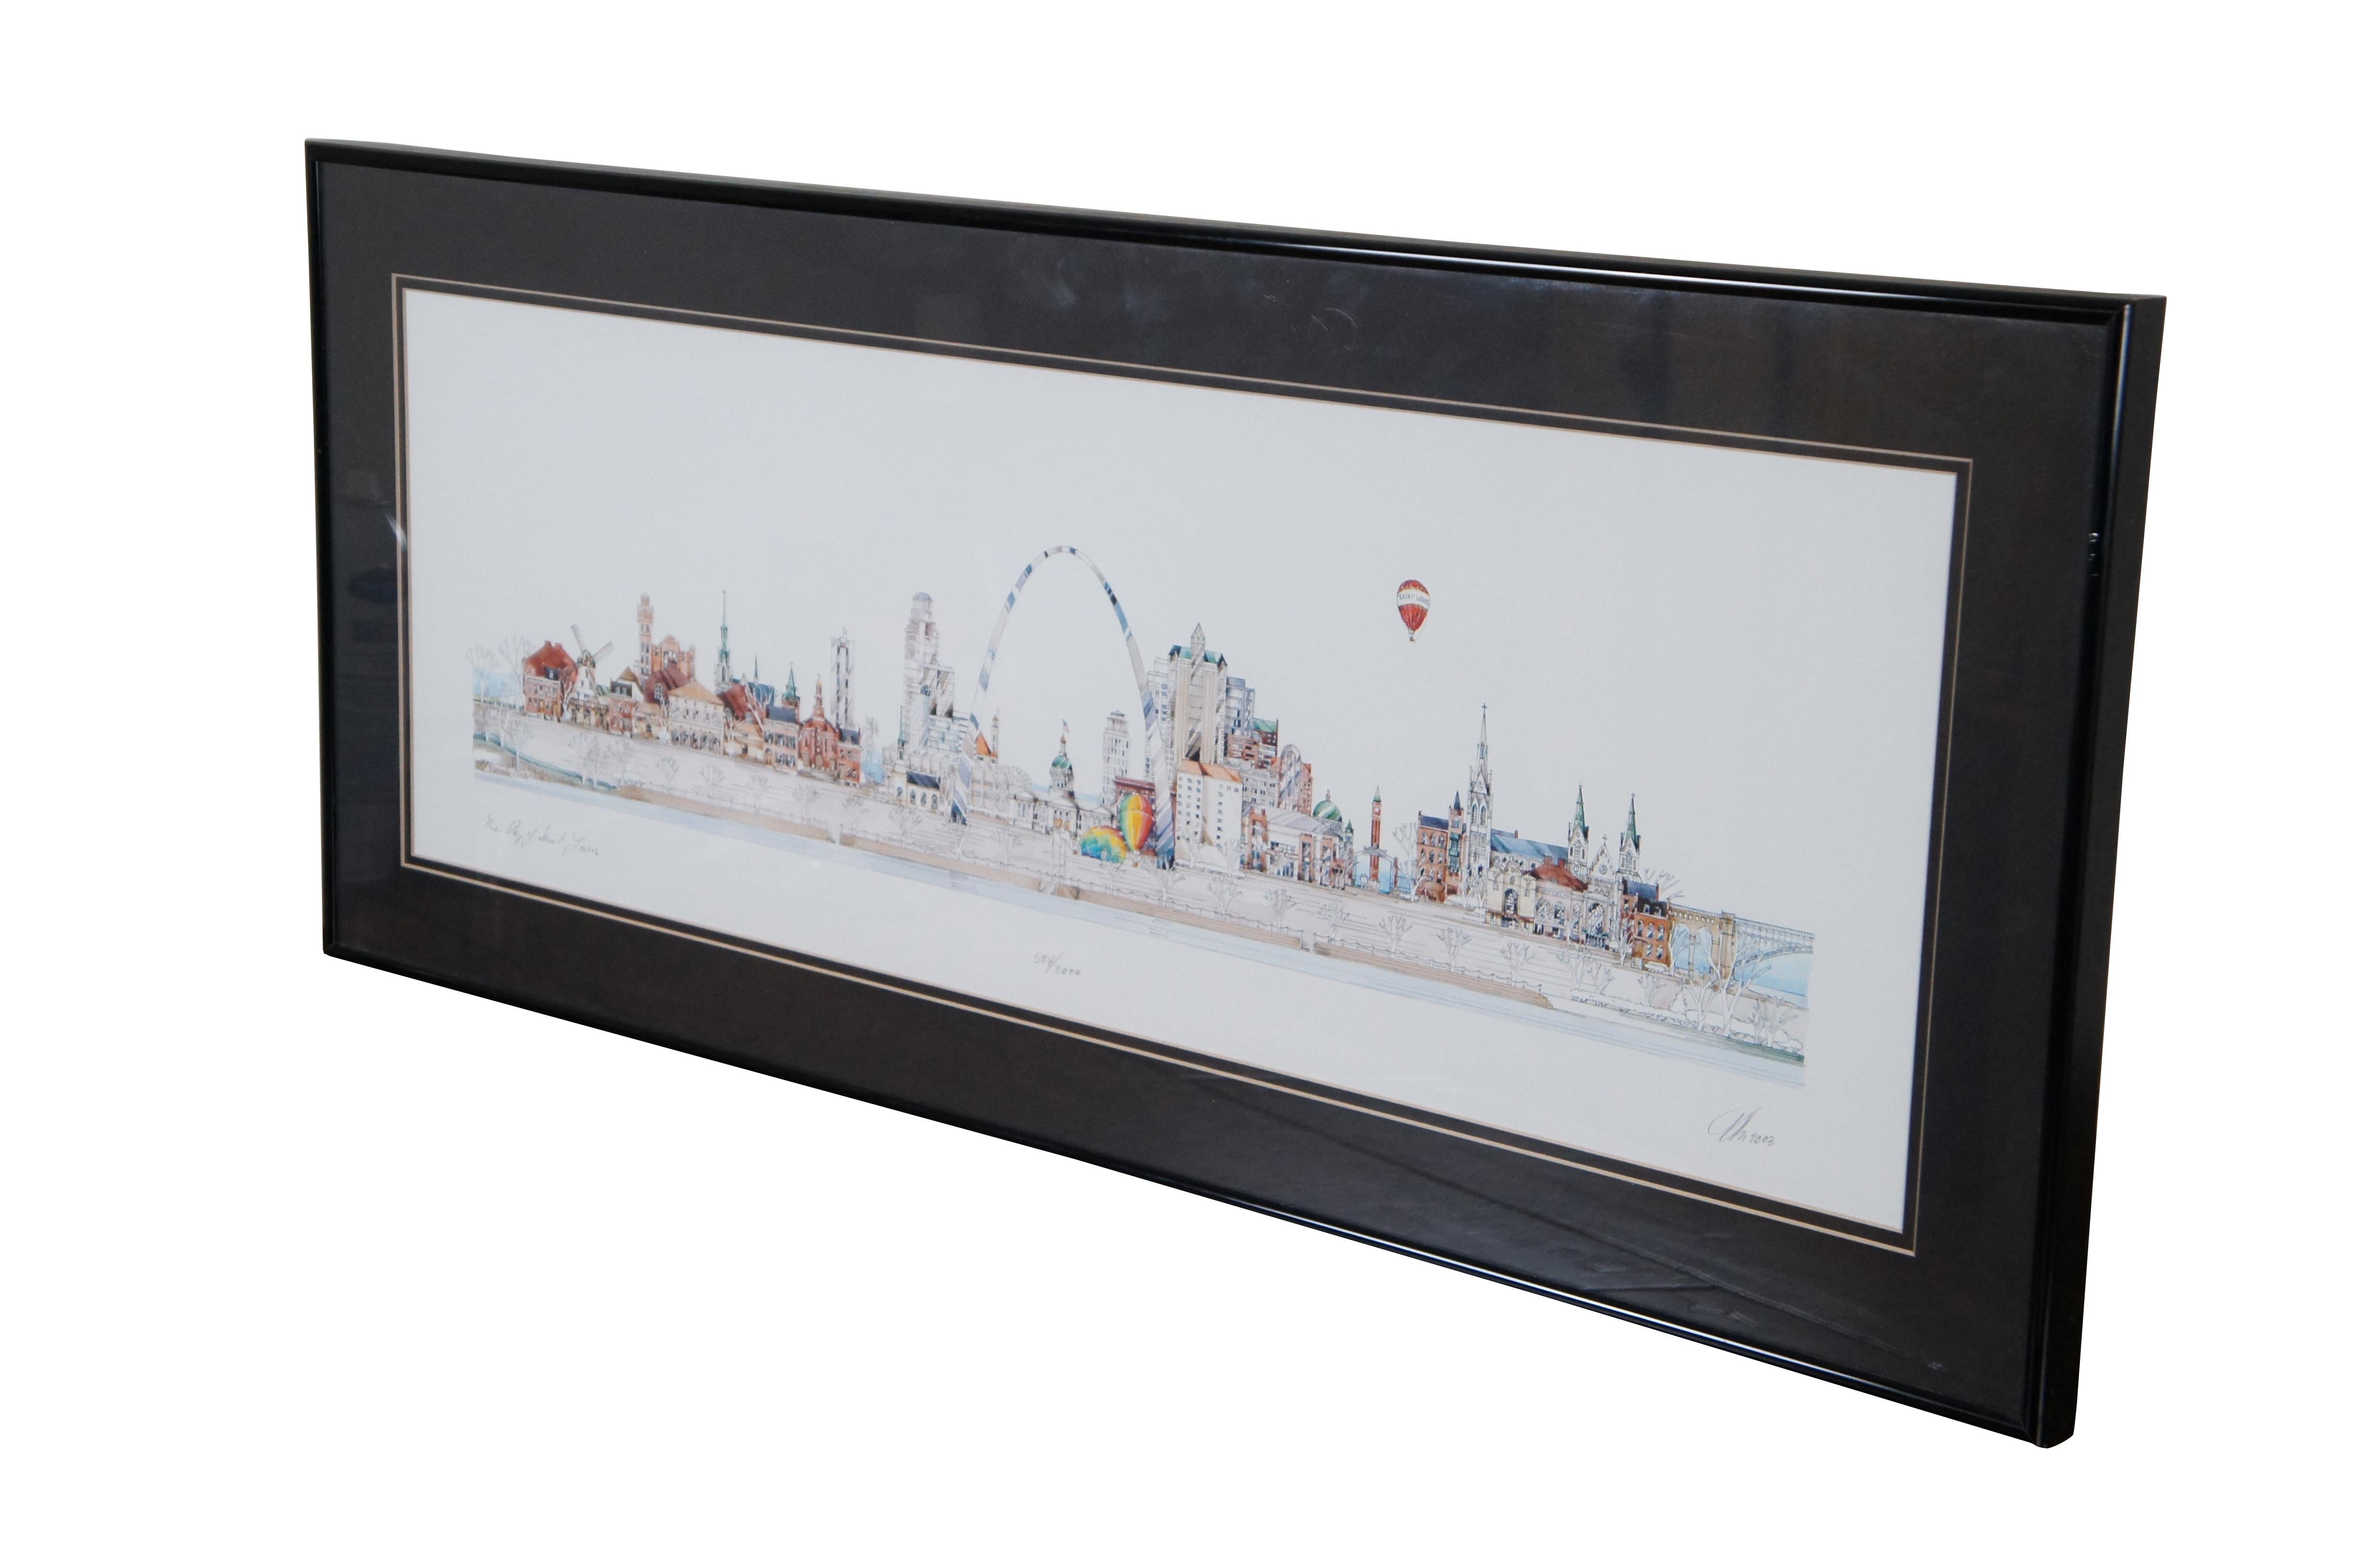 2003 Iris Limited Edition Print of “The City of Saint Louis” by John Pils, pencil signed and numbered 524/2000 by the artist. 

“John Pils was born in 1939 in New York City, NY.  John attended the New Your School of Design and started a career of